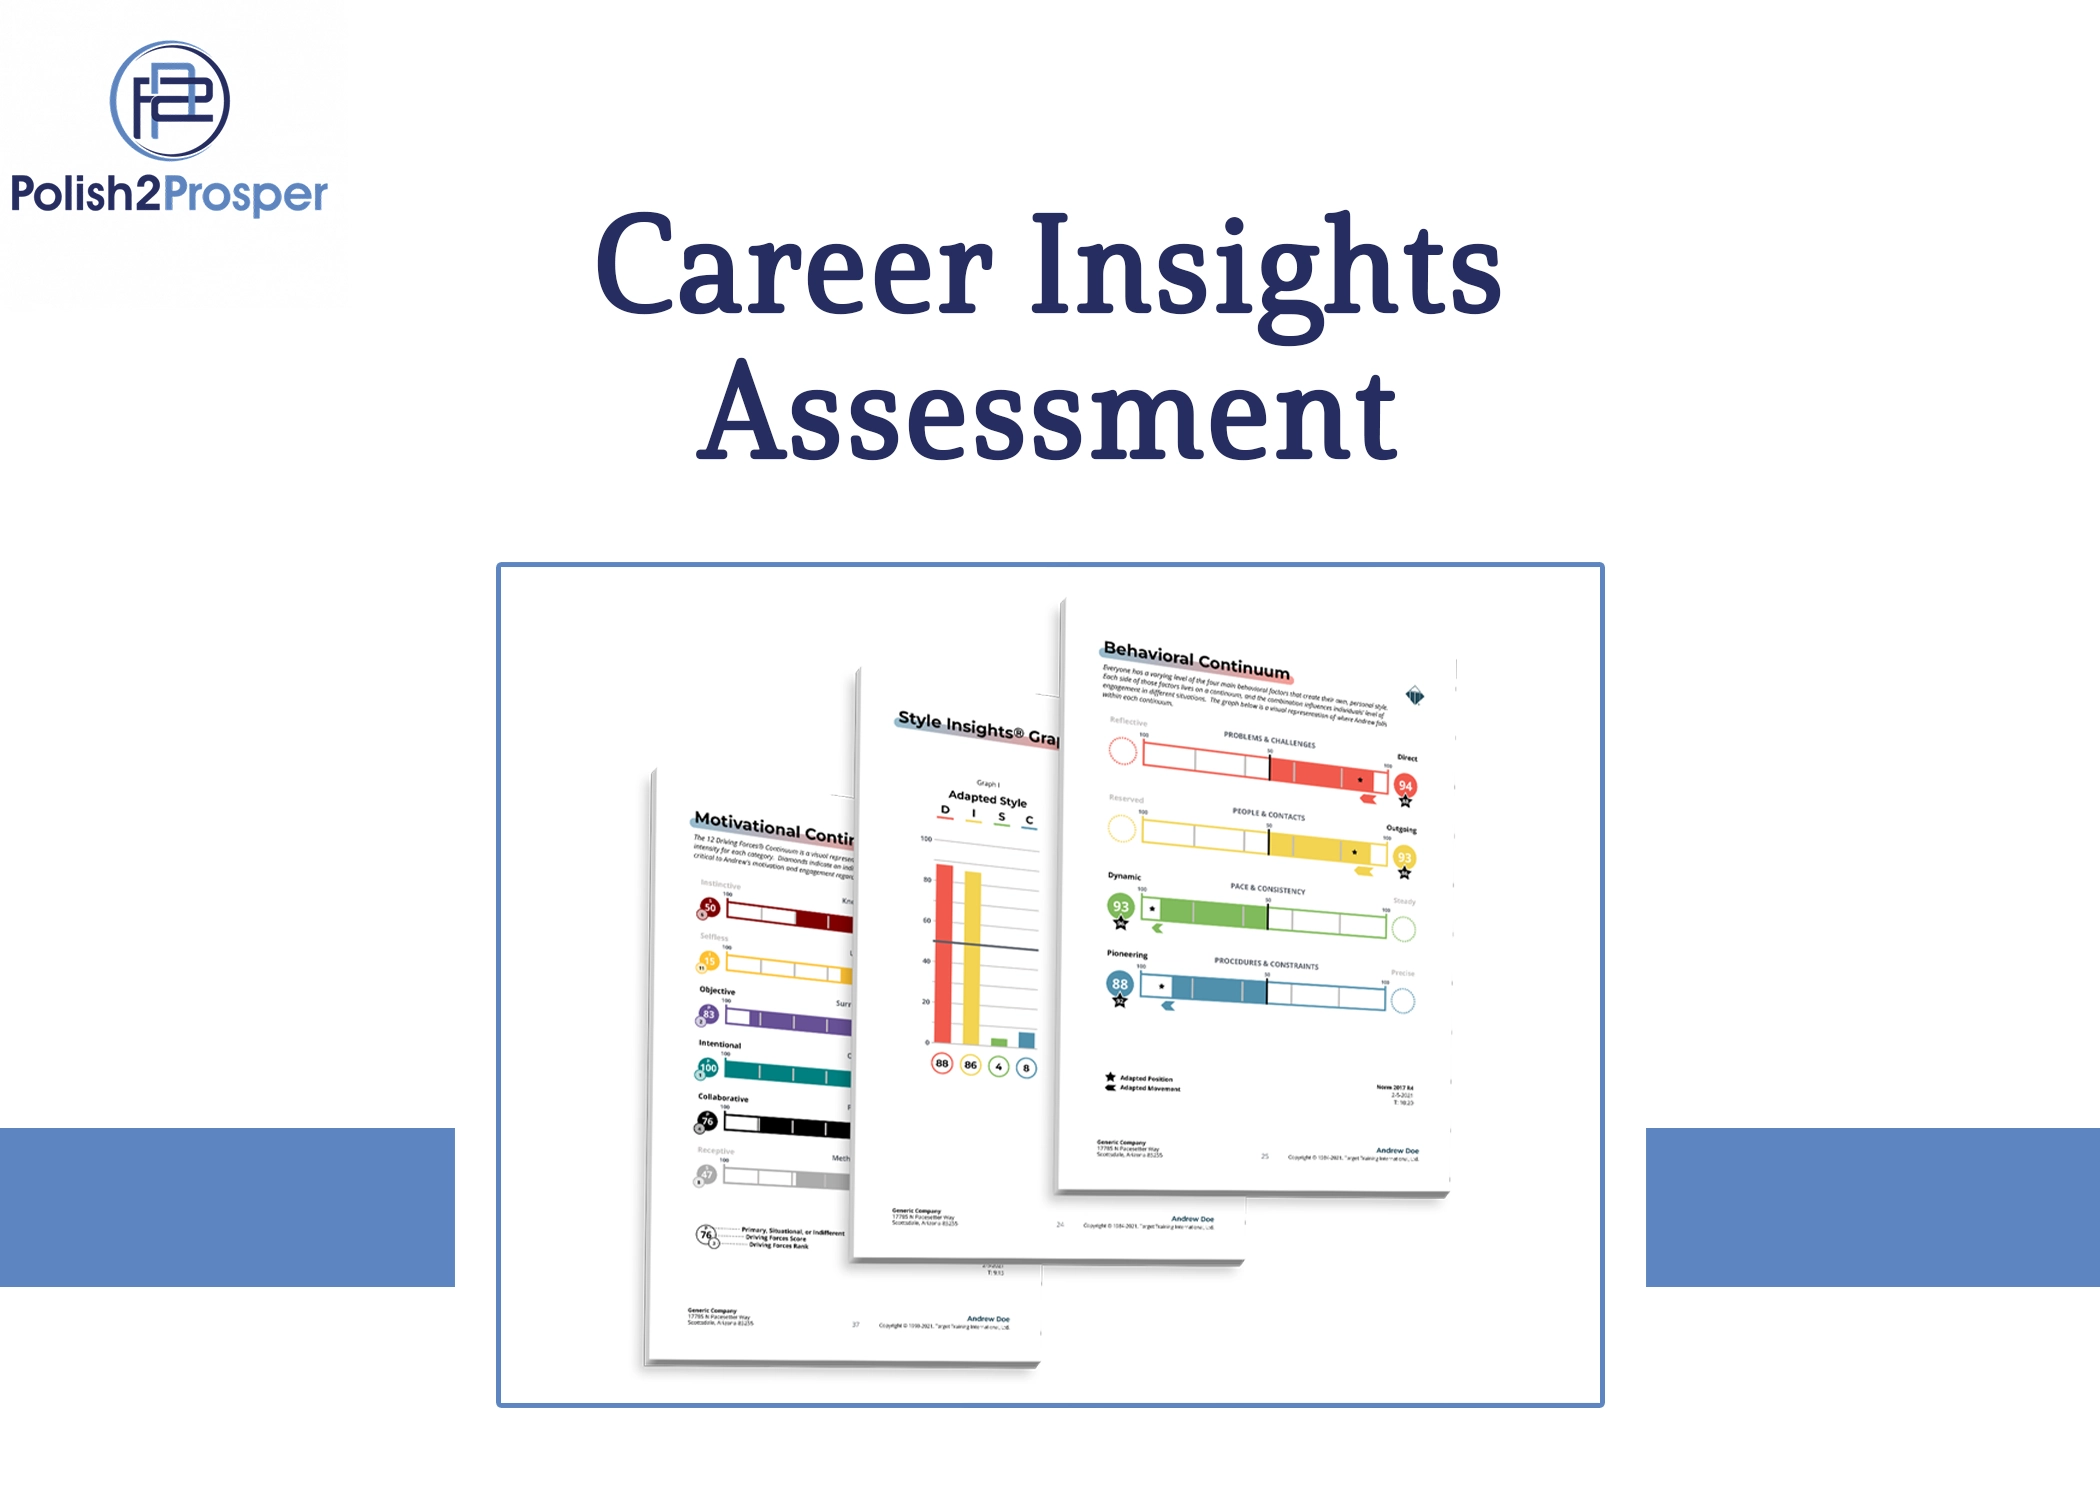 P2P ProductImage Template Career Insights Assessment